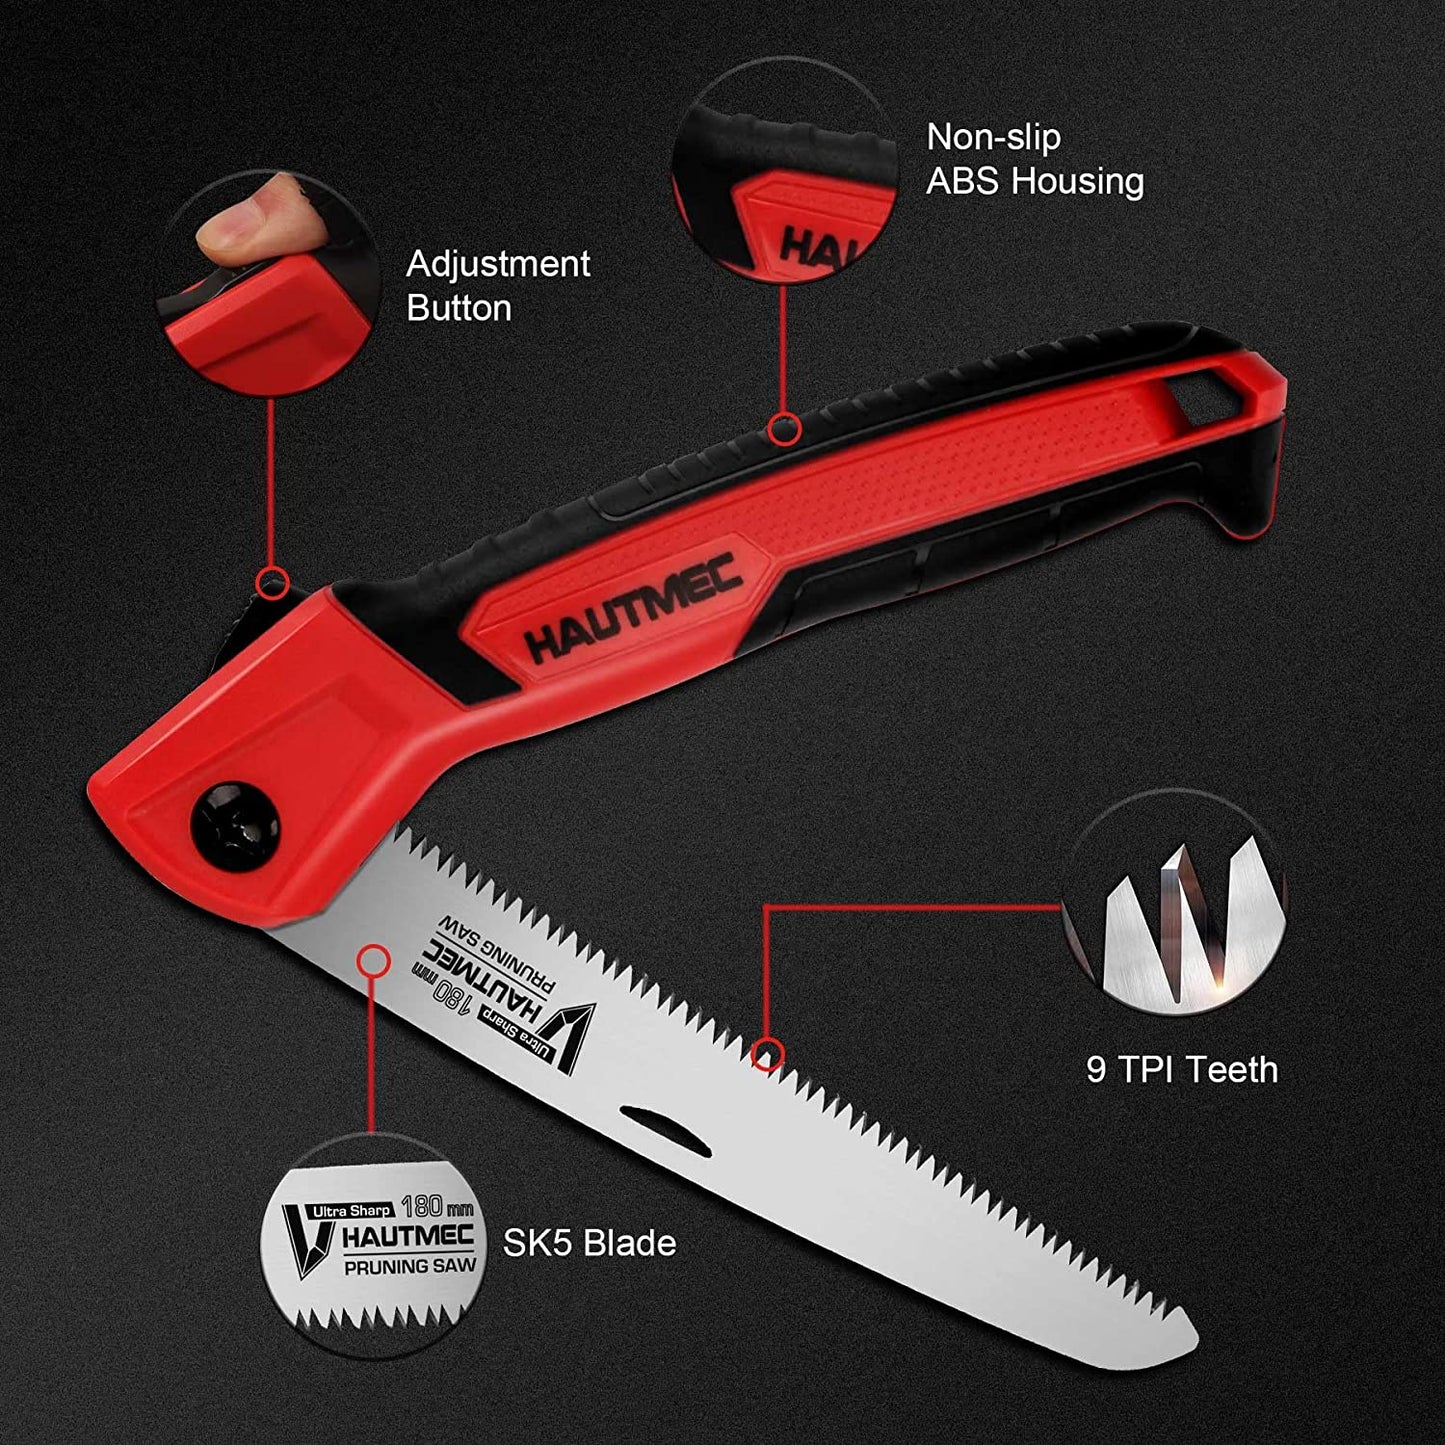 HAUTMEC 7 inch Folding Saw, SK-5 Steel and Triple-ground Teeth, Heavy Duty Single-Hand Blade Hand Saw for Wood Camping, Dry Wood Pruning Saw, for Garden Camping, Hunting and Bushcraft HT0135-PS